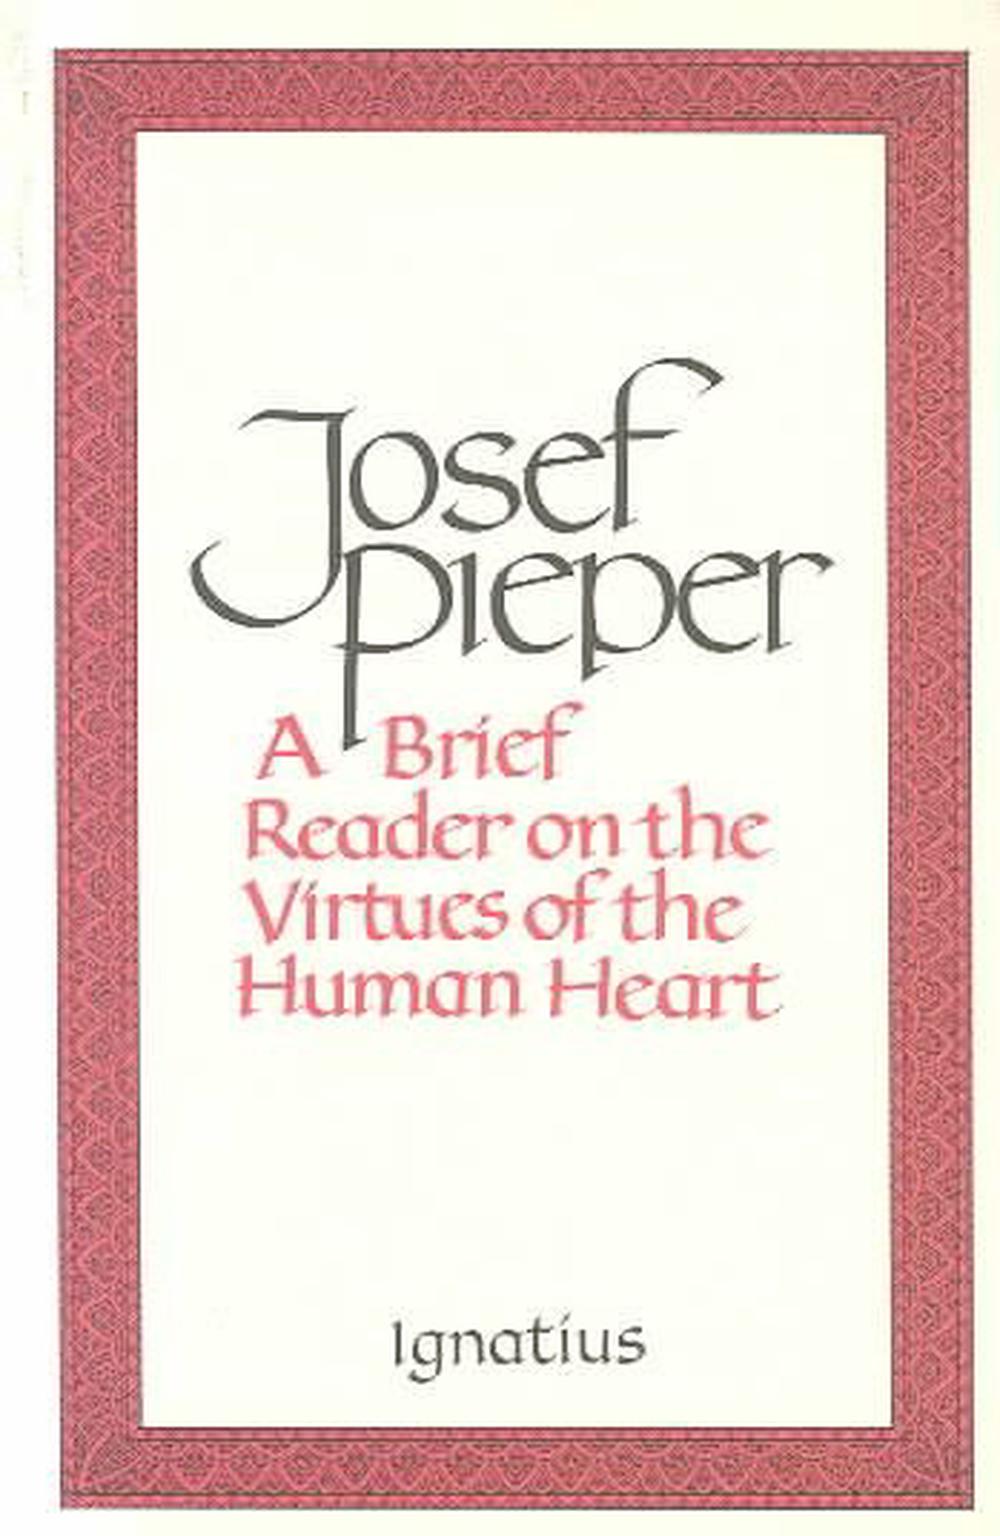 A Brief Reader on the Virtues of the Human Heart by Josef Pieper